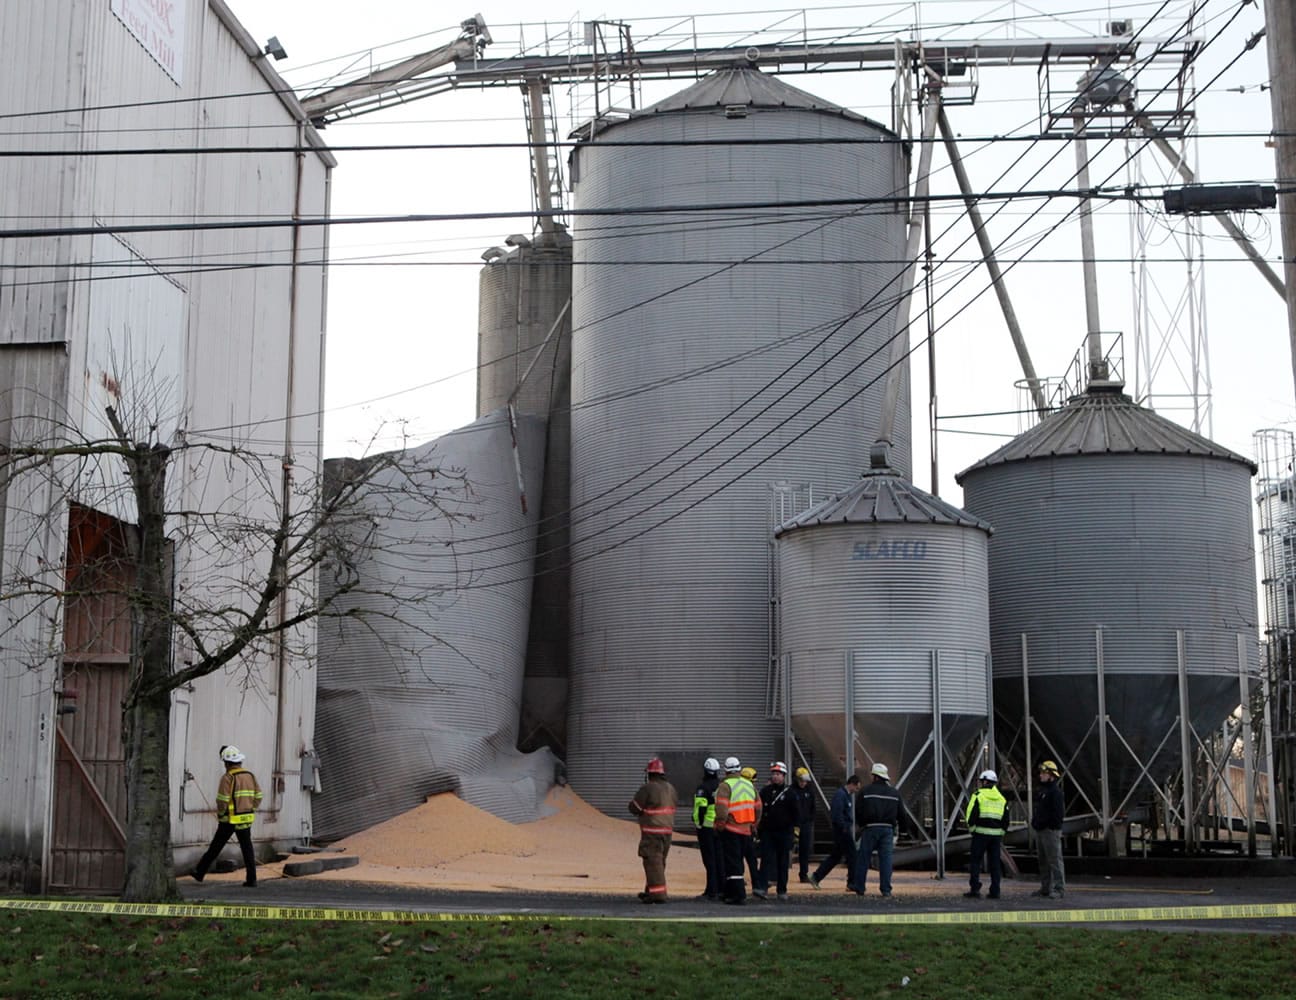 Emergency responders from the South Pierce Fire Department respond to a grain processing feed mill owned by Wilcox Farms in downtown Roy on Monday after one of its silos collapsed.